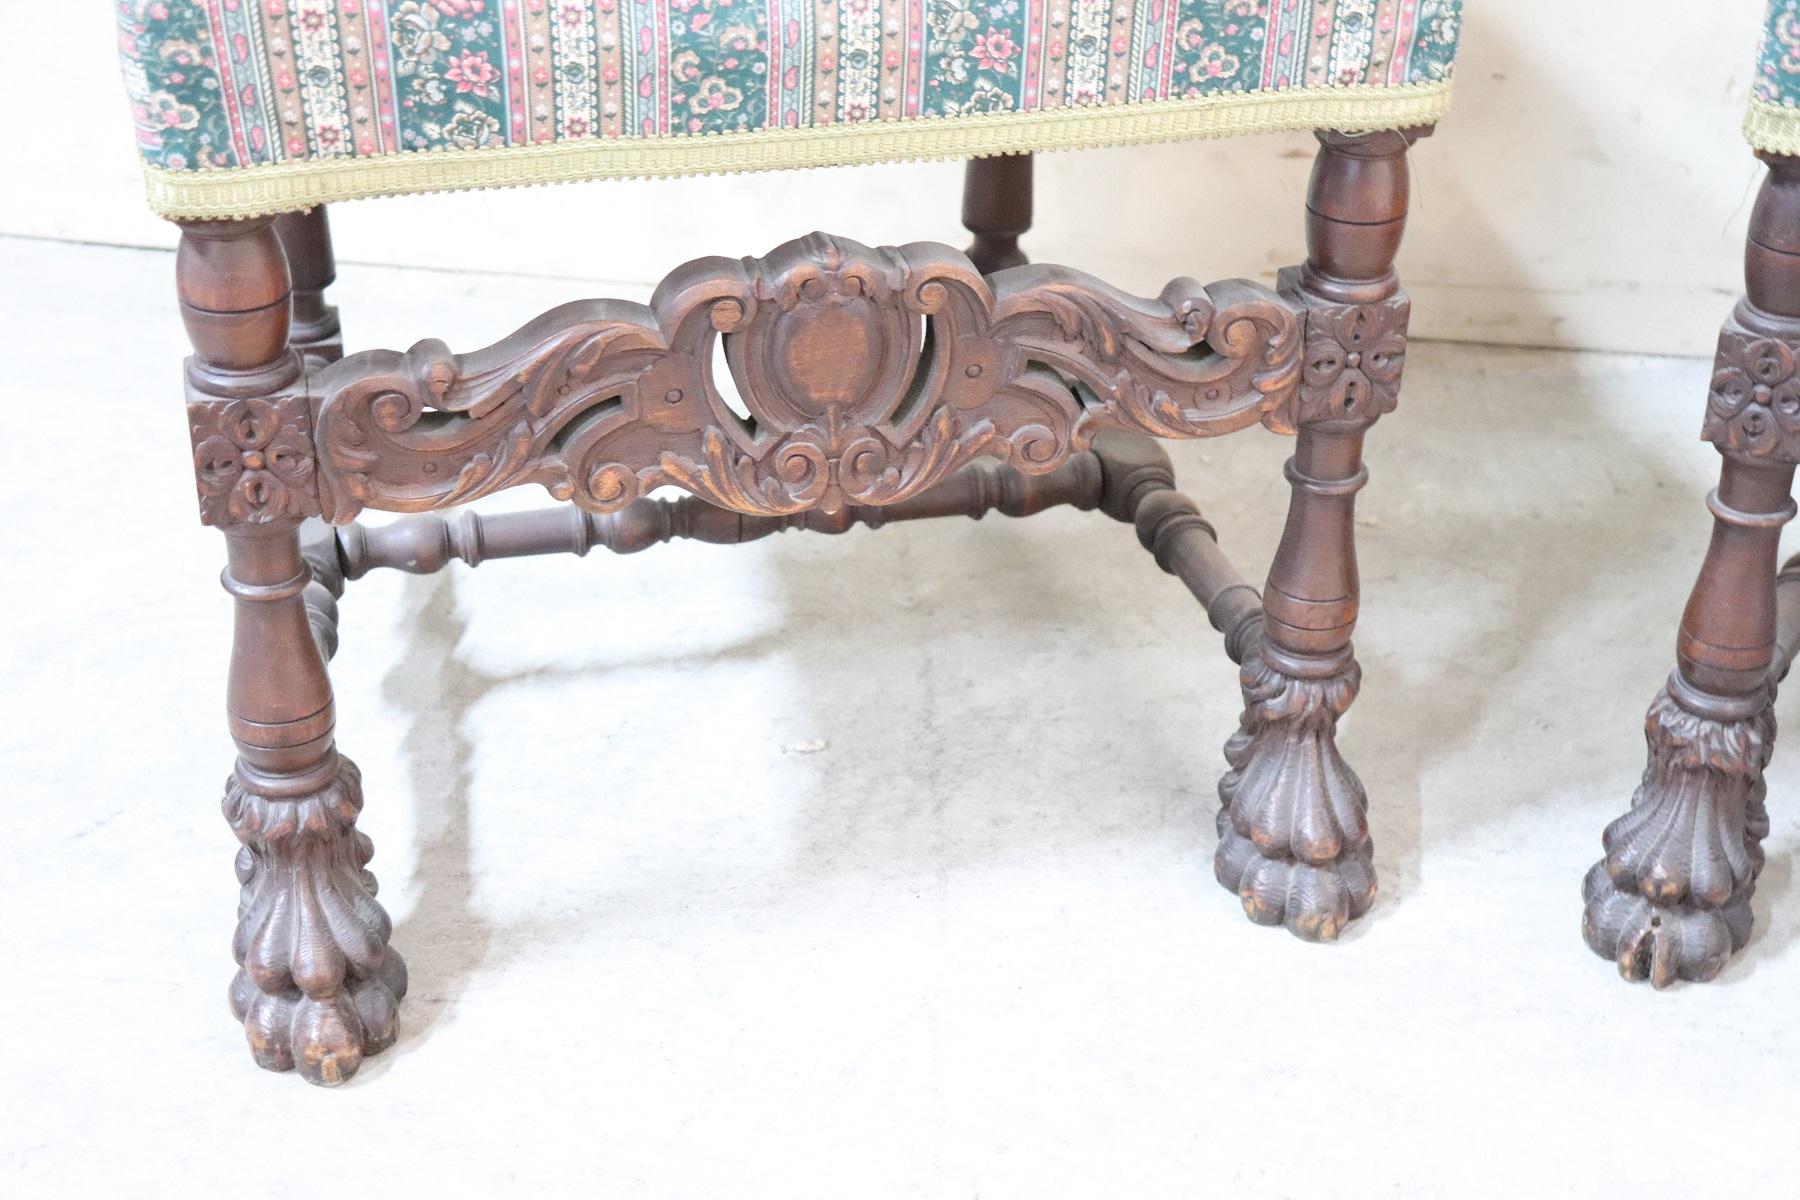 Impressive rare pair of throne chairs in perfect Italian Renaissance style. Made of solid walnut wood. The finely carved wooden backrest with very complex decoration. The armrests and legs are in turned solid walnut. particular lion's paw feet